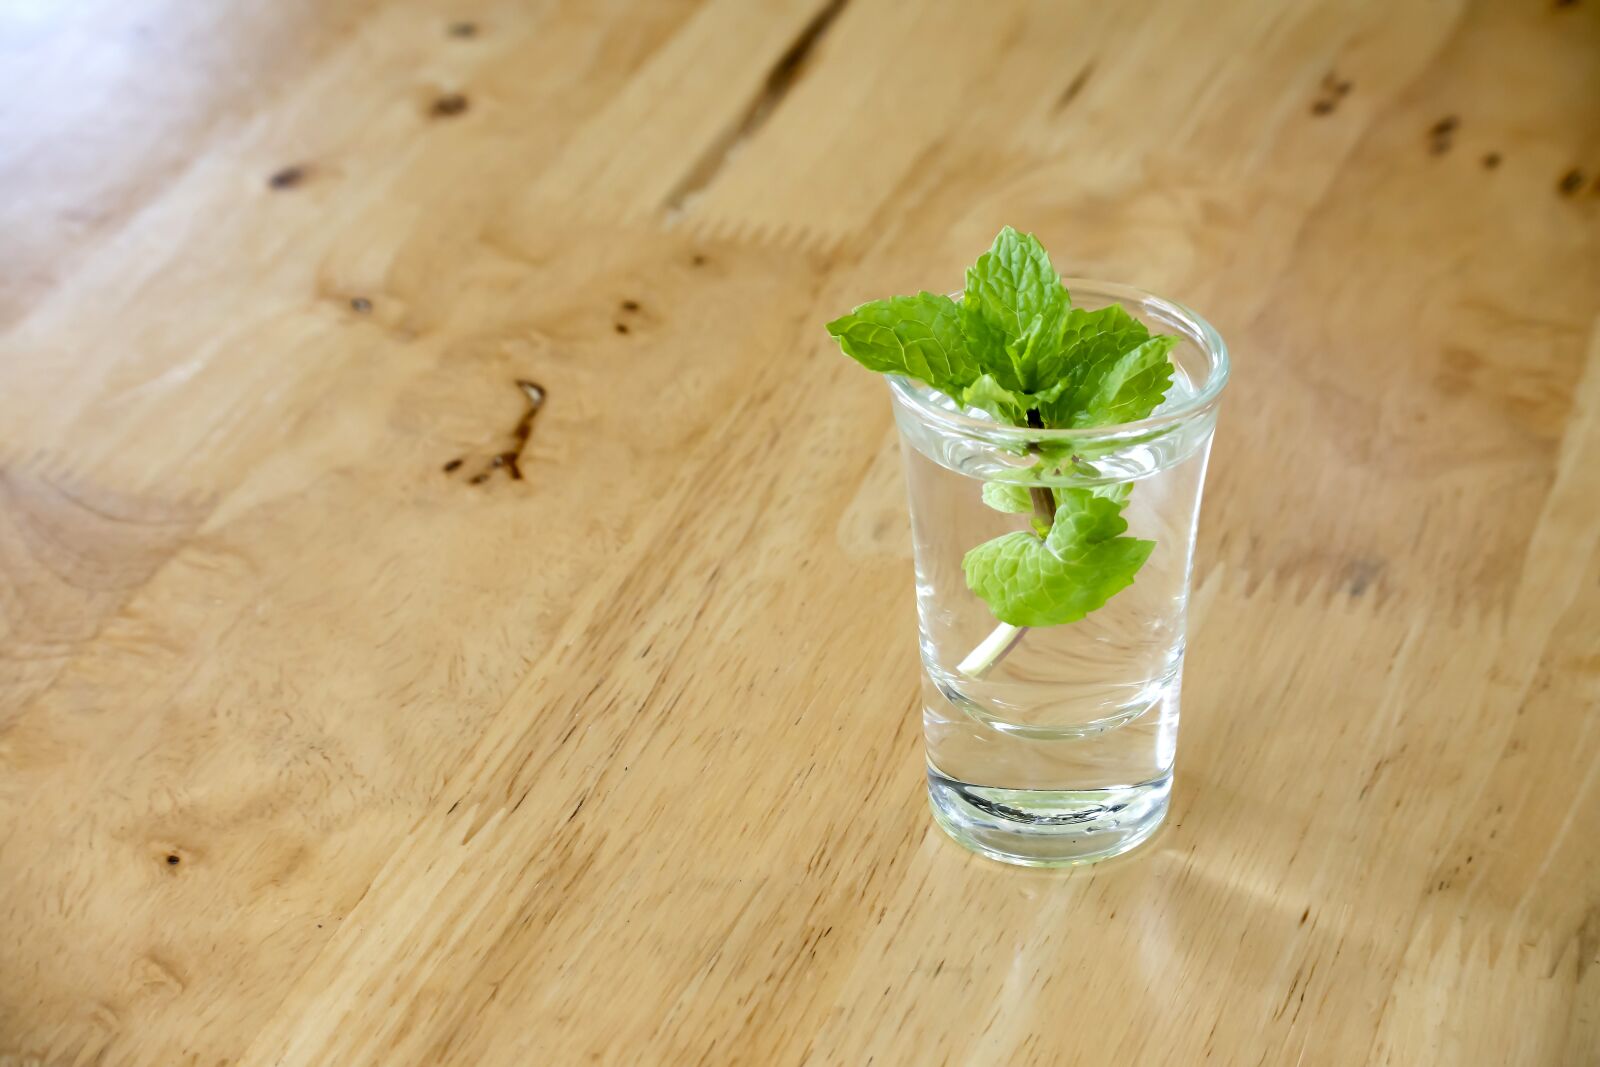 Nikon 1 Nikkor VR 30-110mm F3.8-5.6 sample photo. Peppermint, glass, a photography